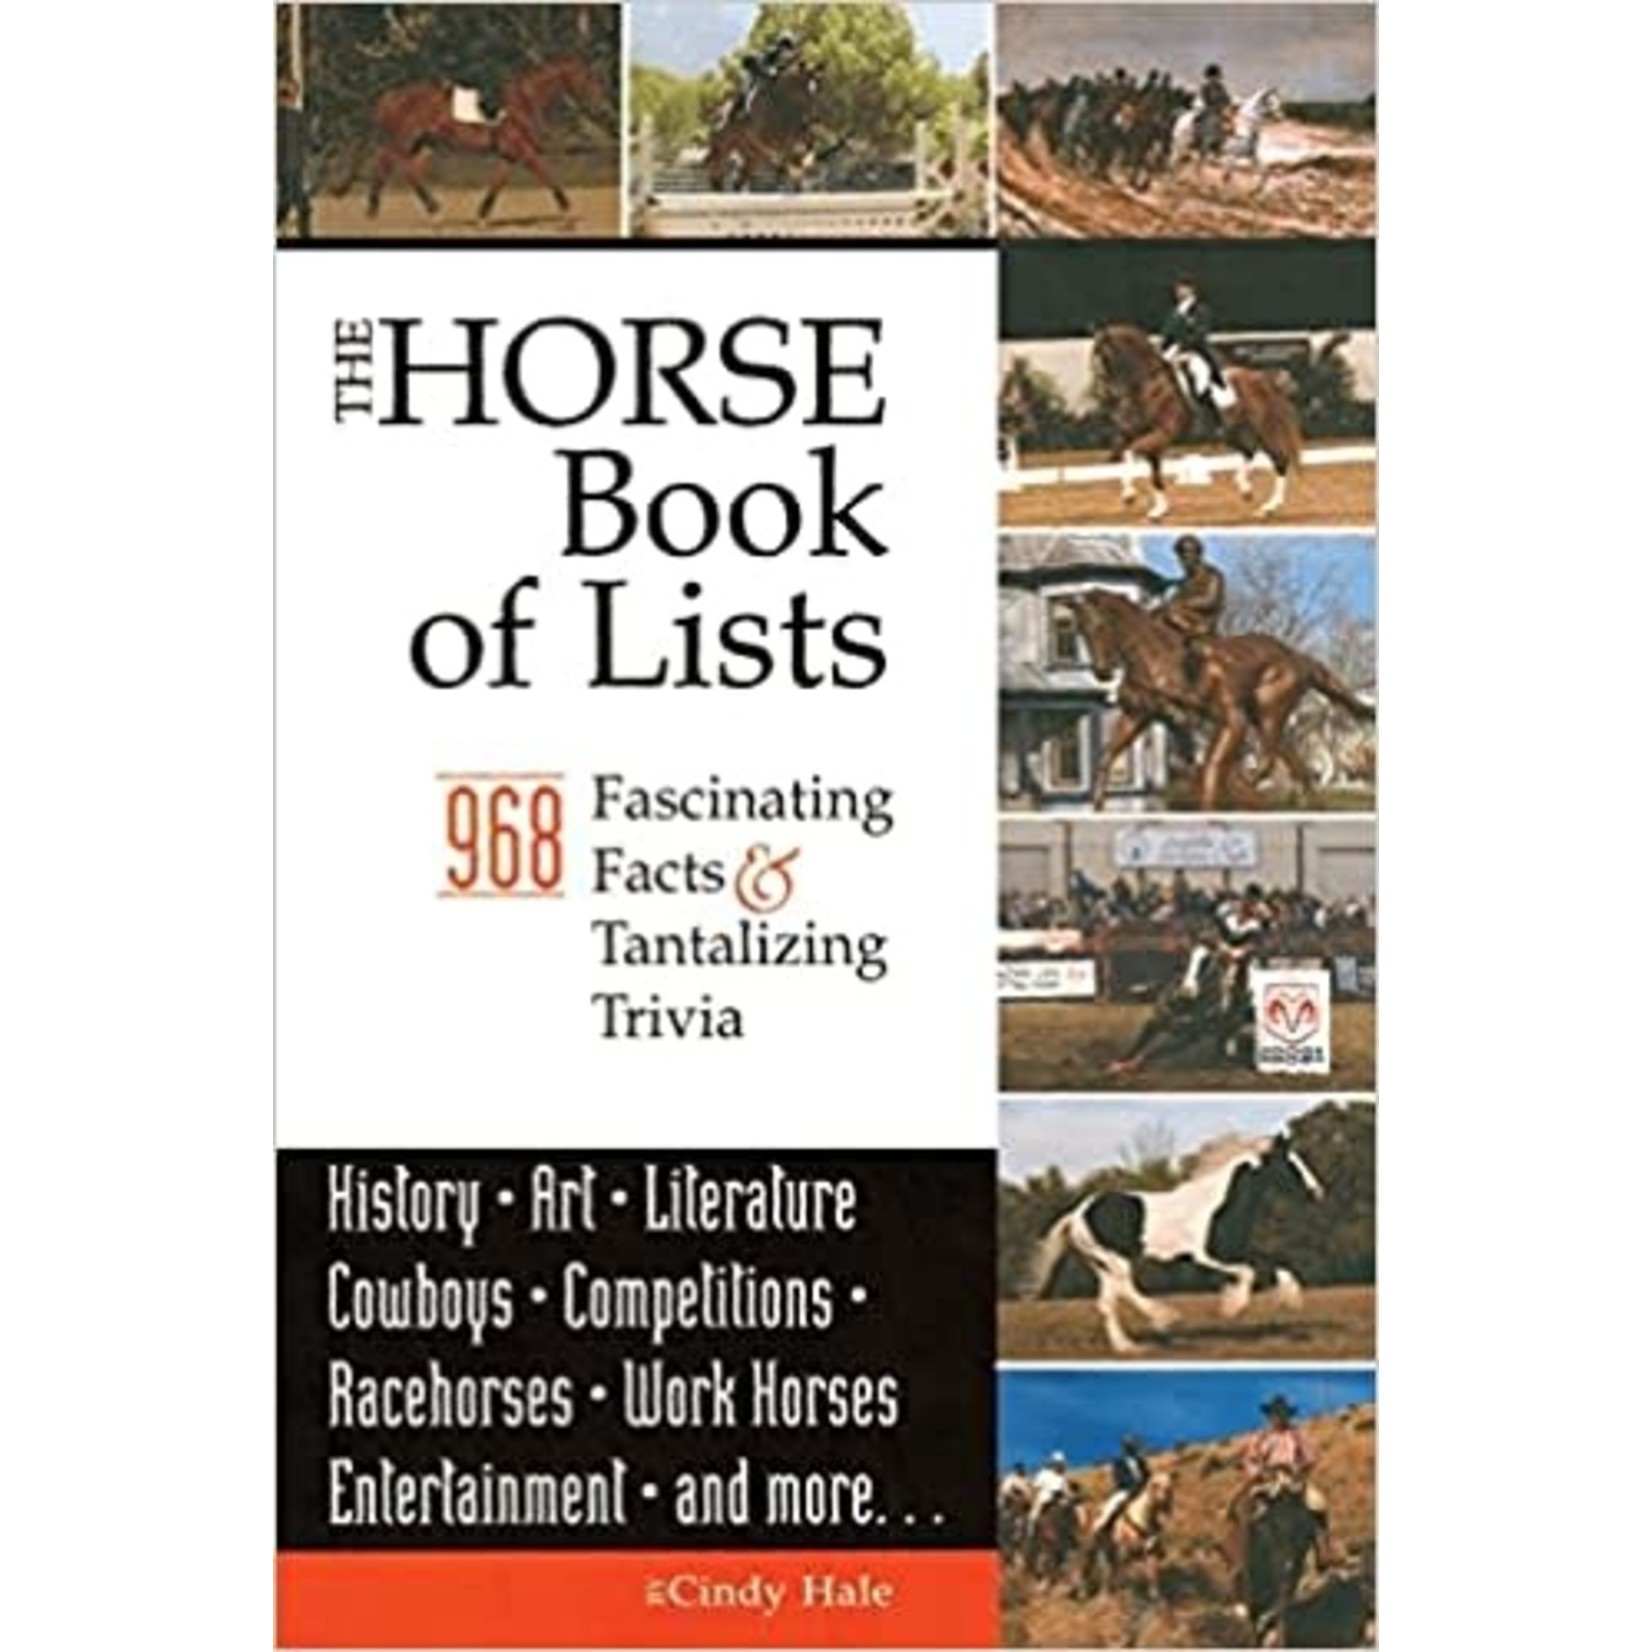 The Horse Book of Lists